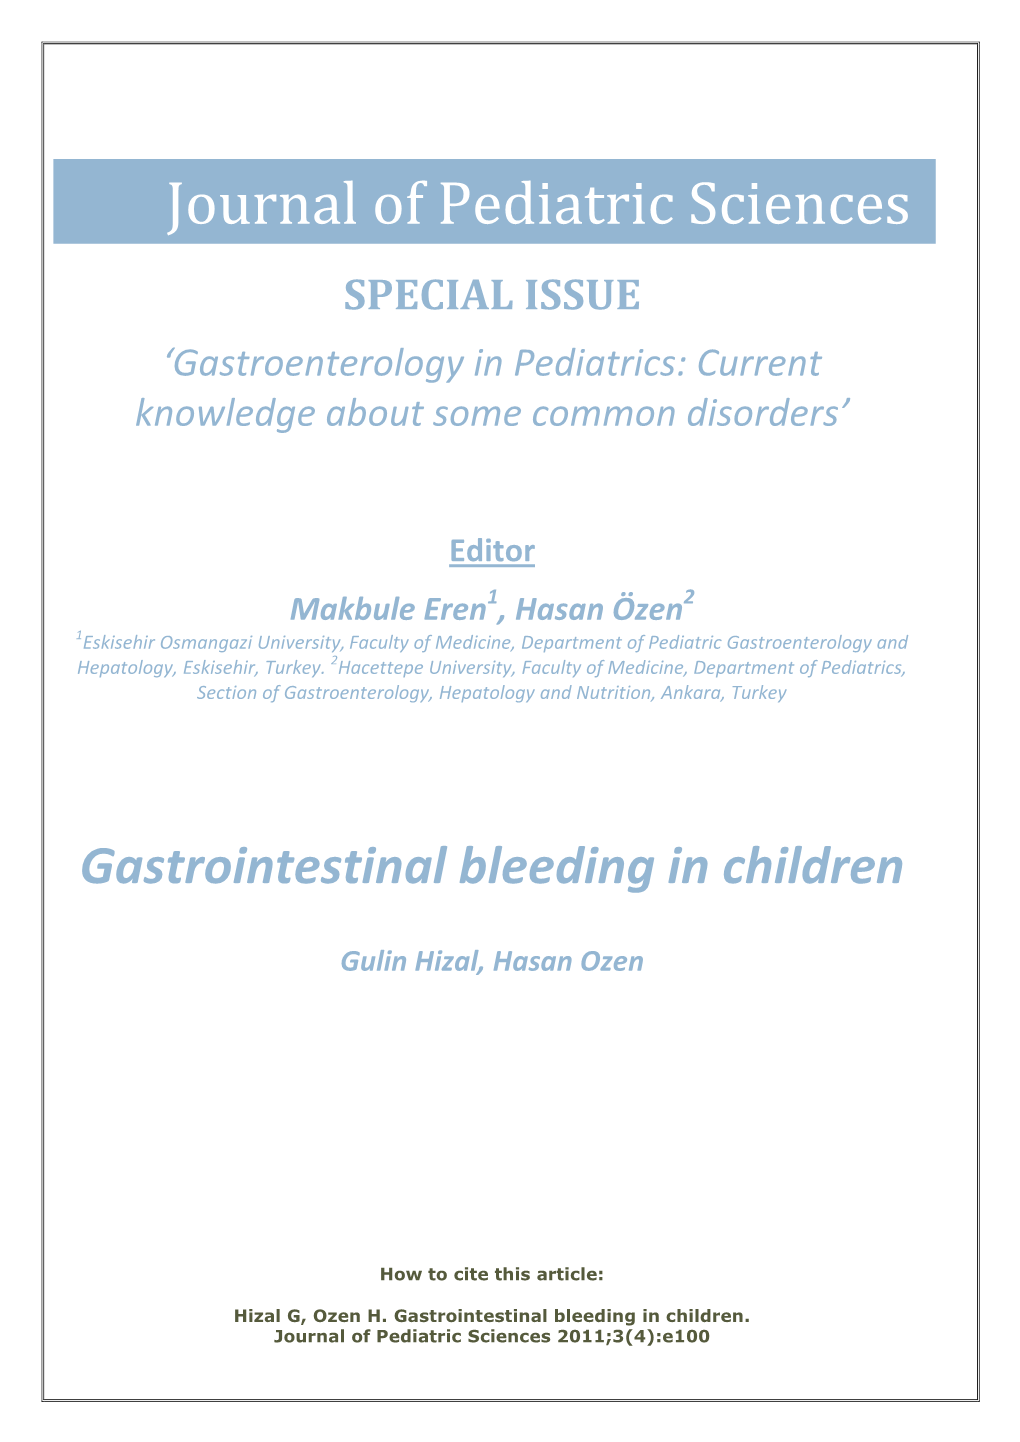 Journal of Pediatric Sciences SPECIAL ISSUE ‘Gastroenterology in Pediatrics: Current Knowledge About Some Common Disorders’